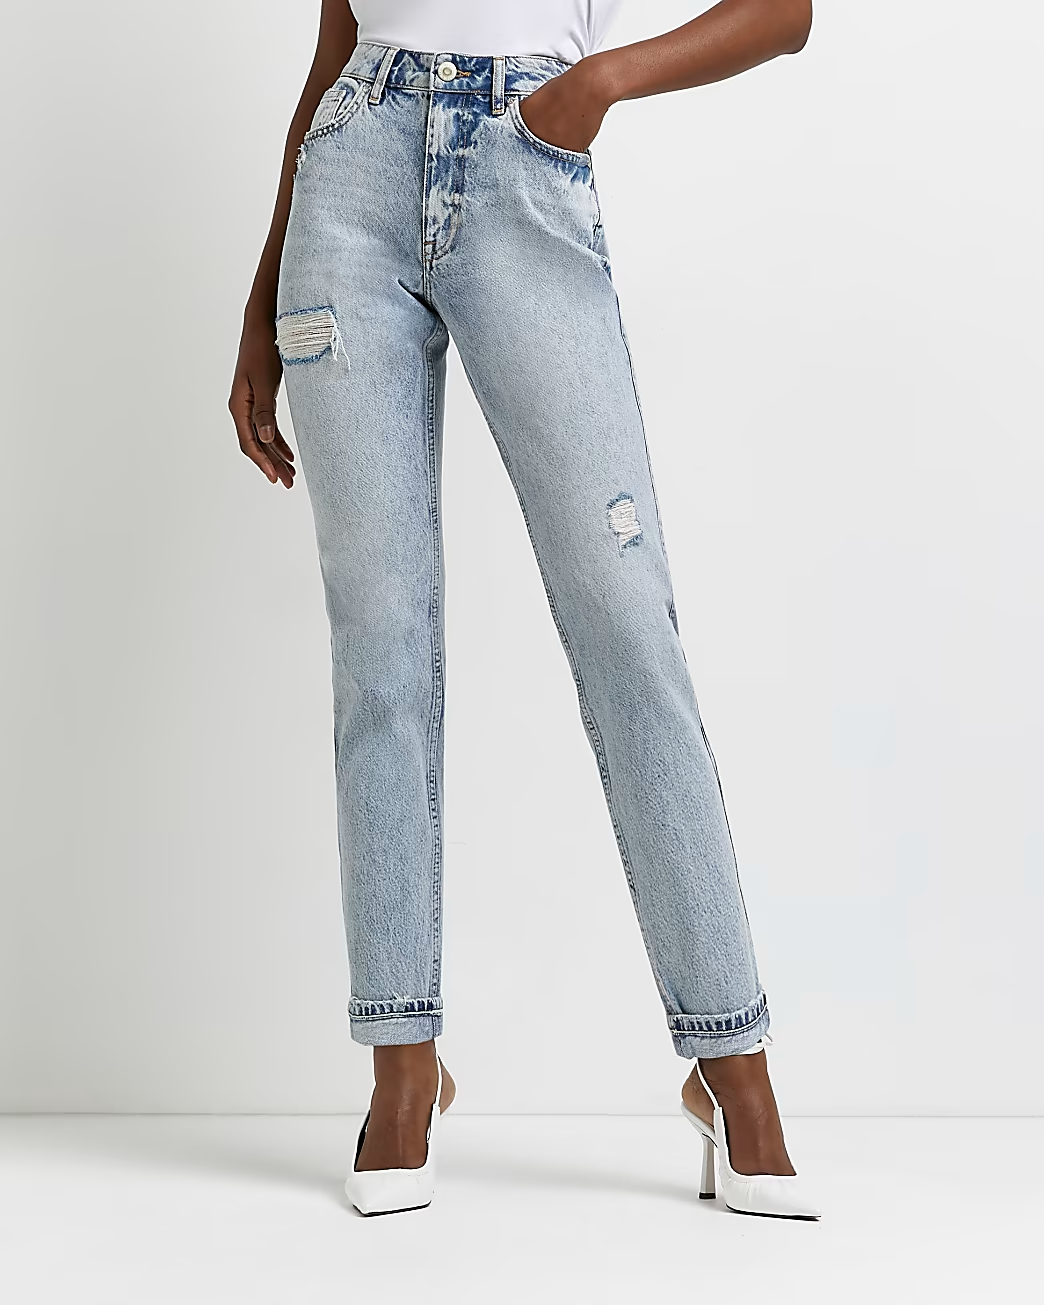 BLUE RIPPED HIGH WAISTED MOM JEANS